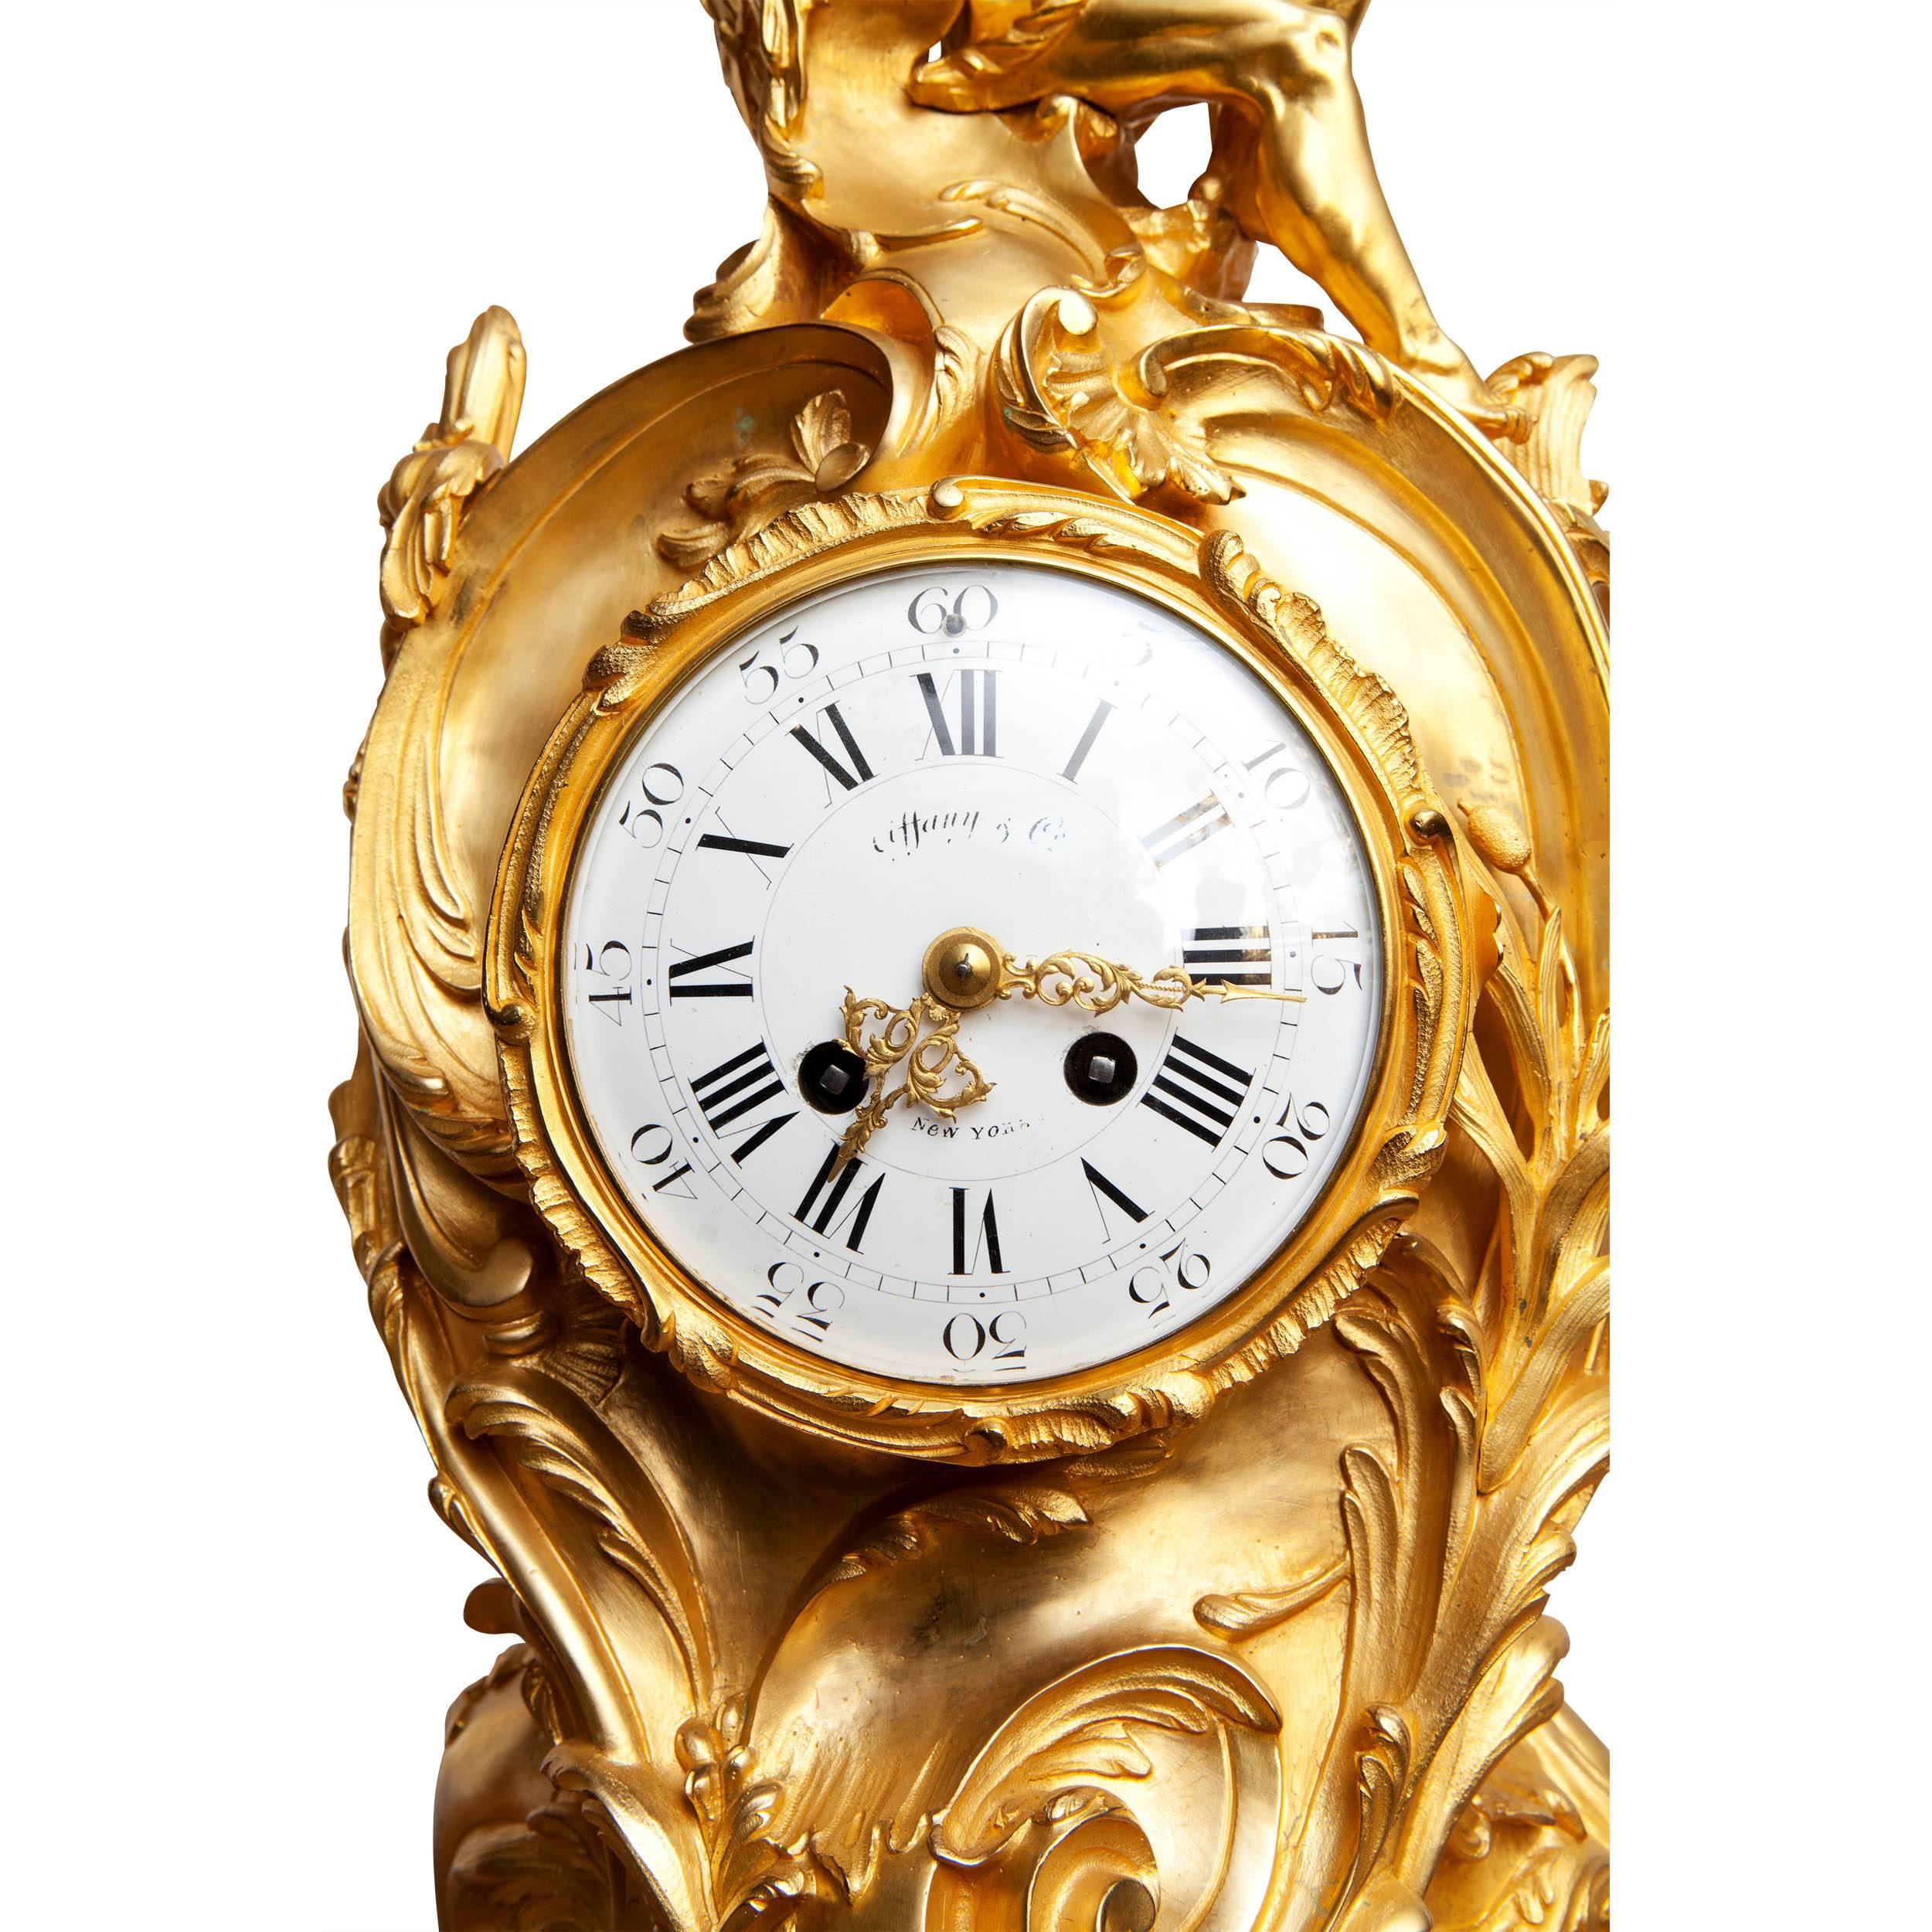 France, circa 1870-1880.

The porcelain dial signed Tiffany & Co and stamped Tiffany on movement. The fine mercury gilt bronze case standing on four scrolled feet with reeds culminating with Father Time holding a sceptre and sitting above the